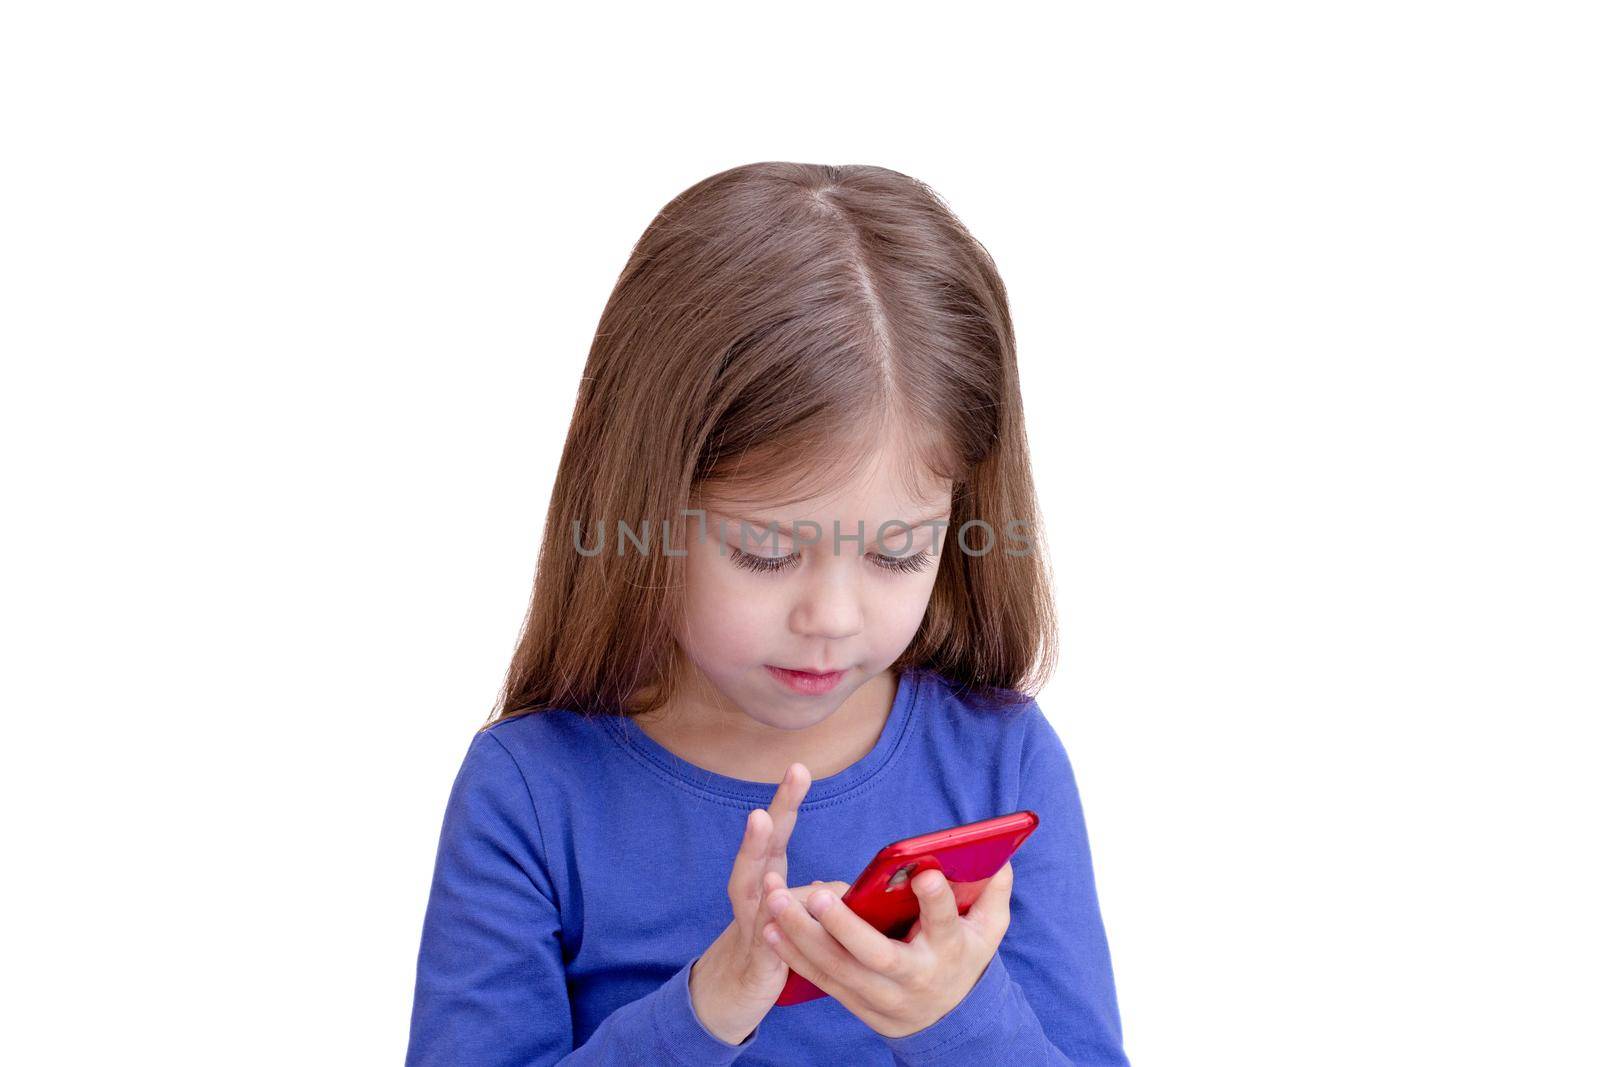 Serious child looking at mobile phone and touching screen , isolated on white background waist up caucasian little girl of 5 years in blue